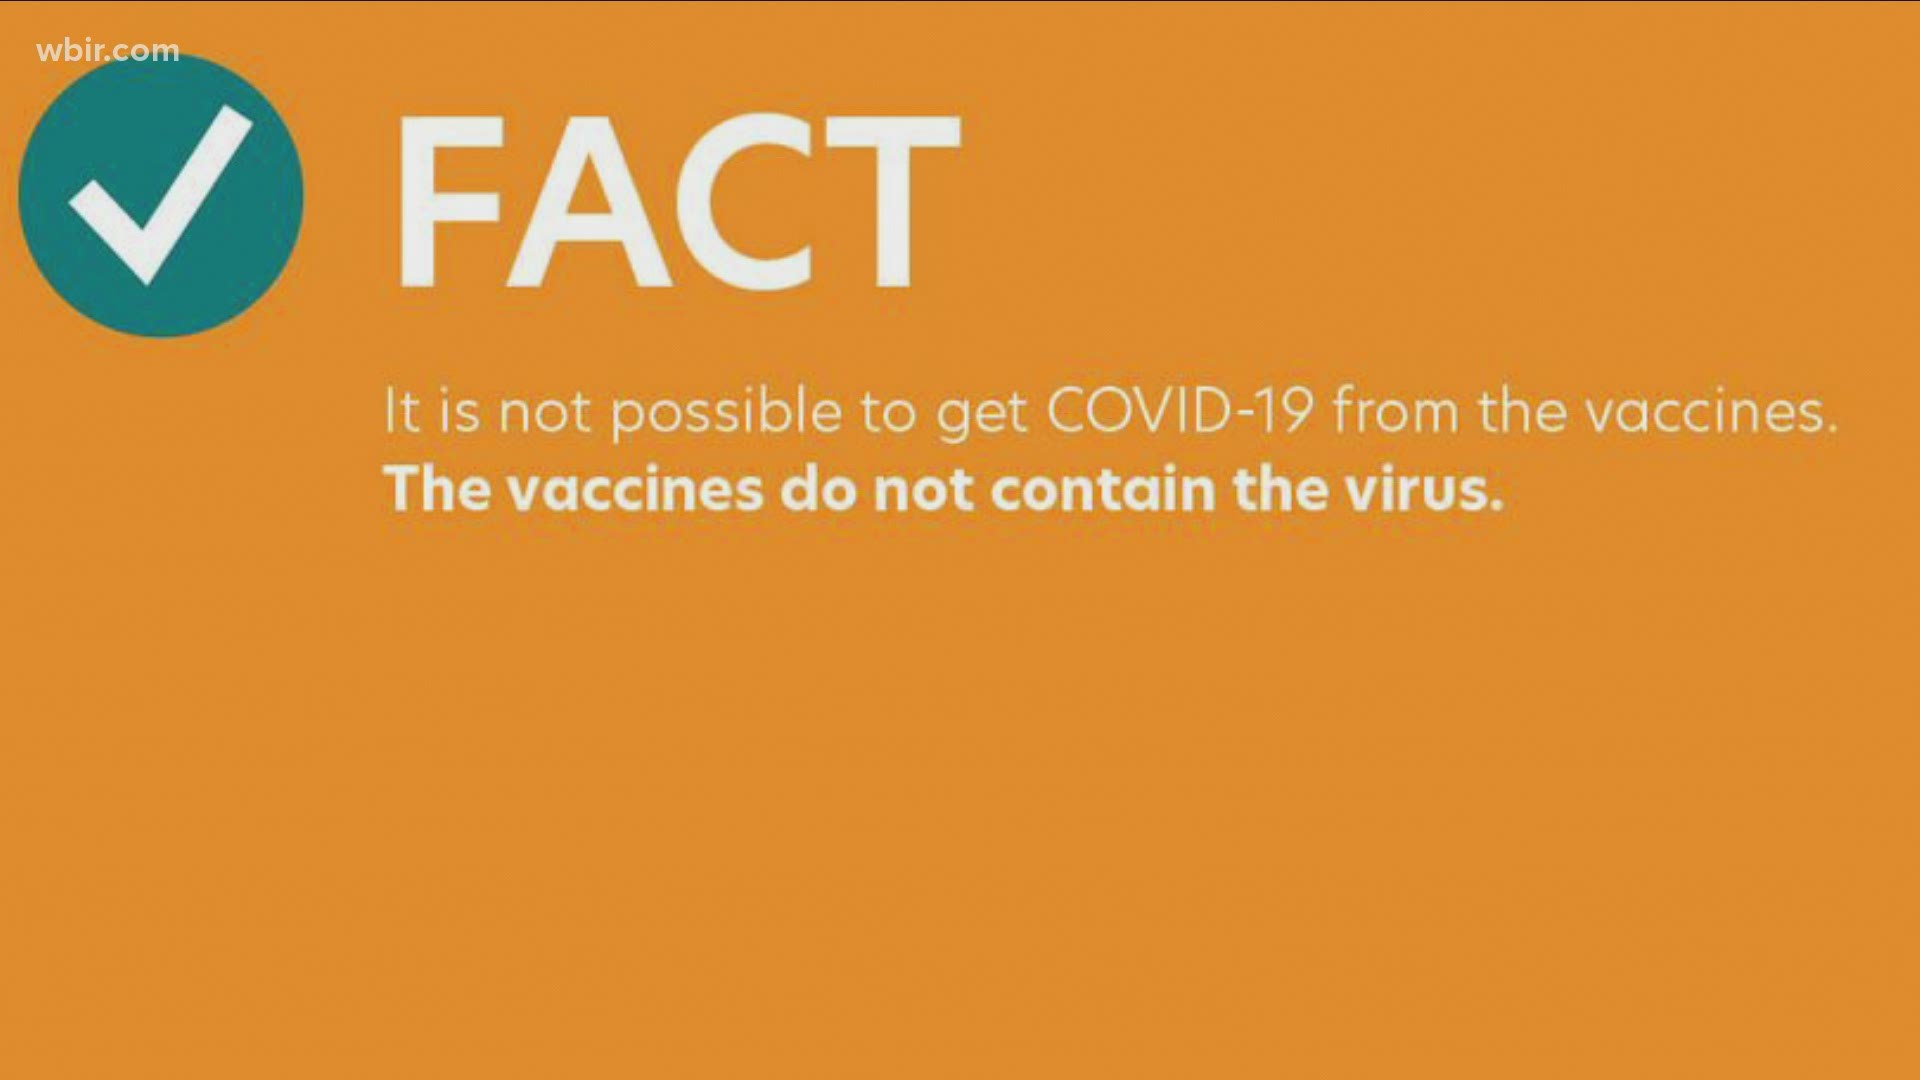 The UT Medical Center is launching series that debunks myths about the COVID-19 vaccines.